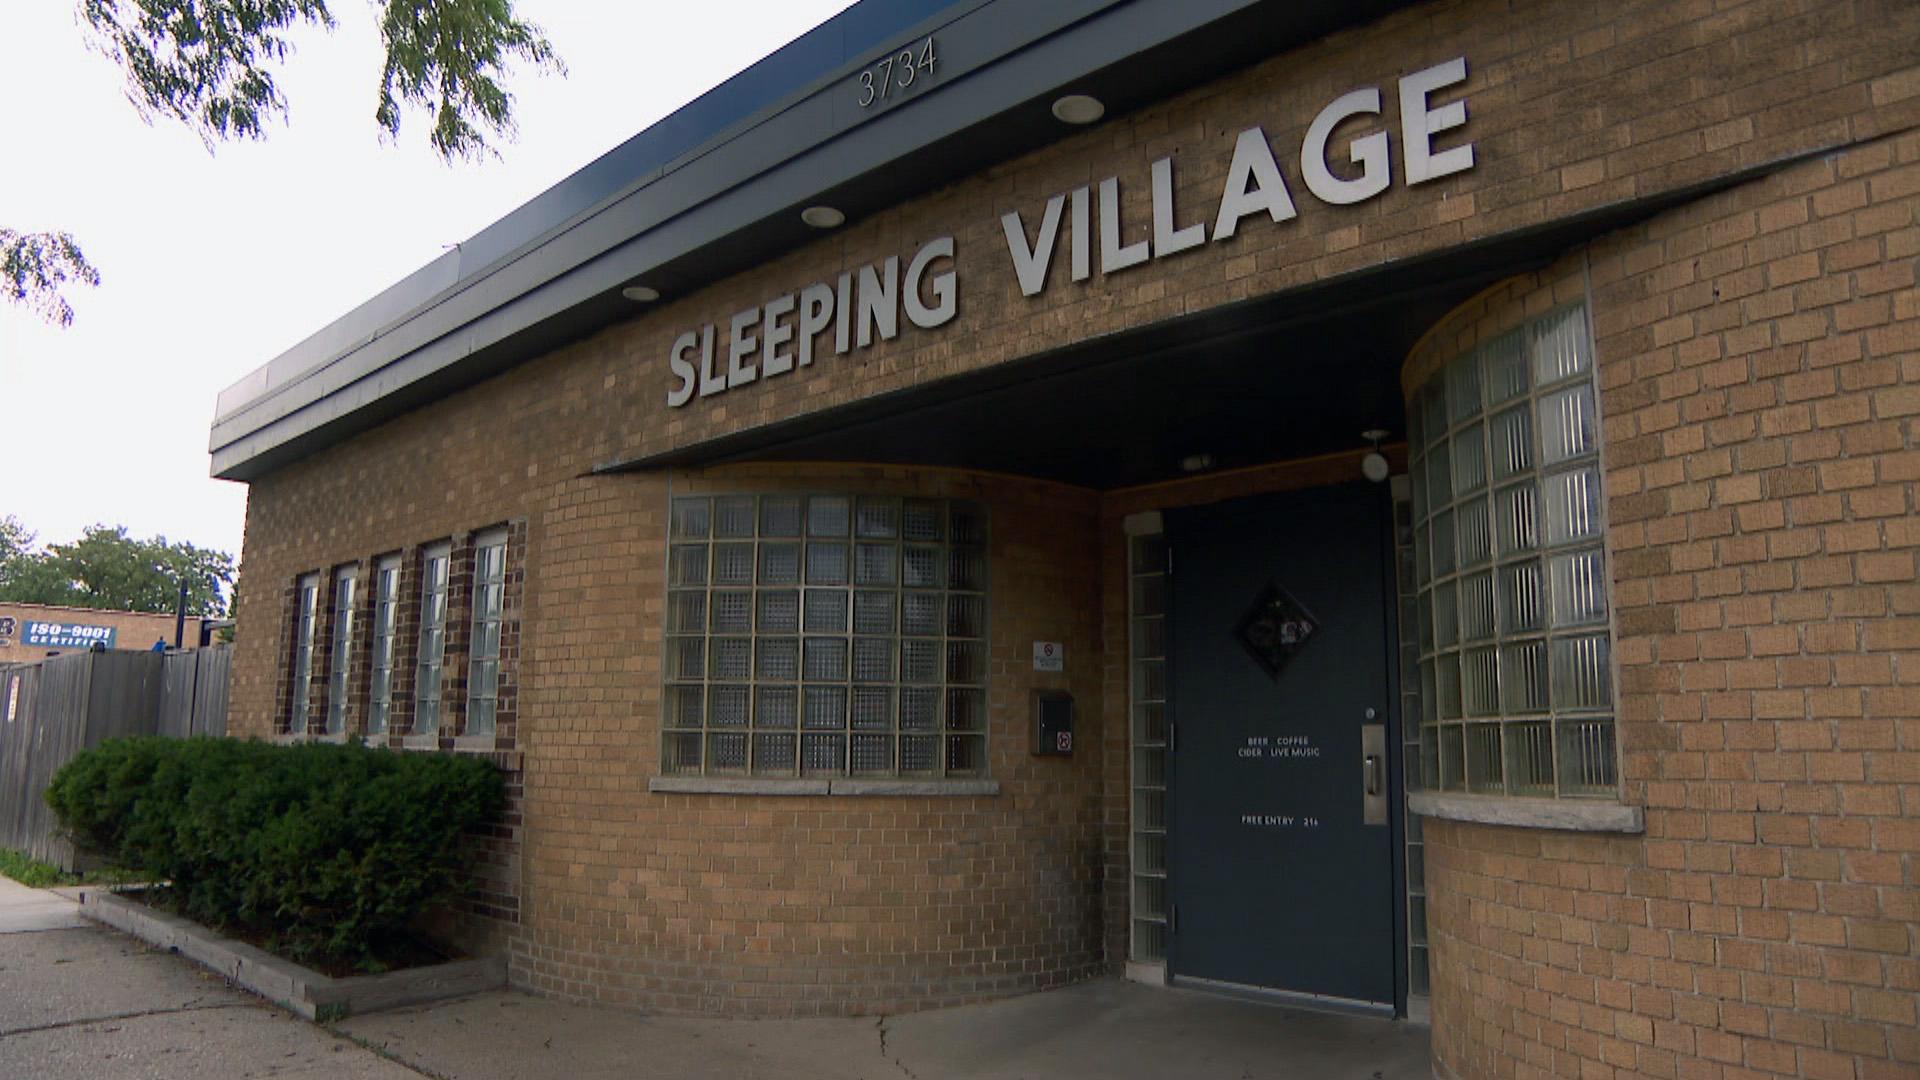 Sleeping Village, a bar, restaurant and music venue on Belmont, is one of several making it a policy that customers who enter must be masked and show proof of vaccination. (WTTW News)